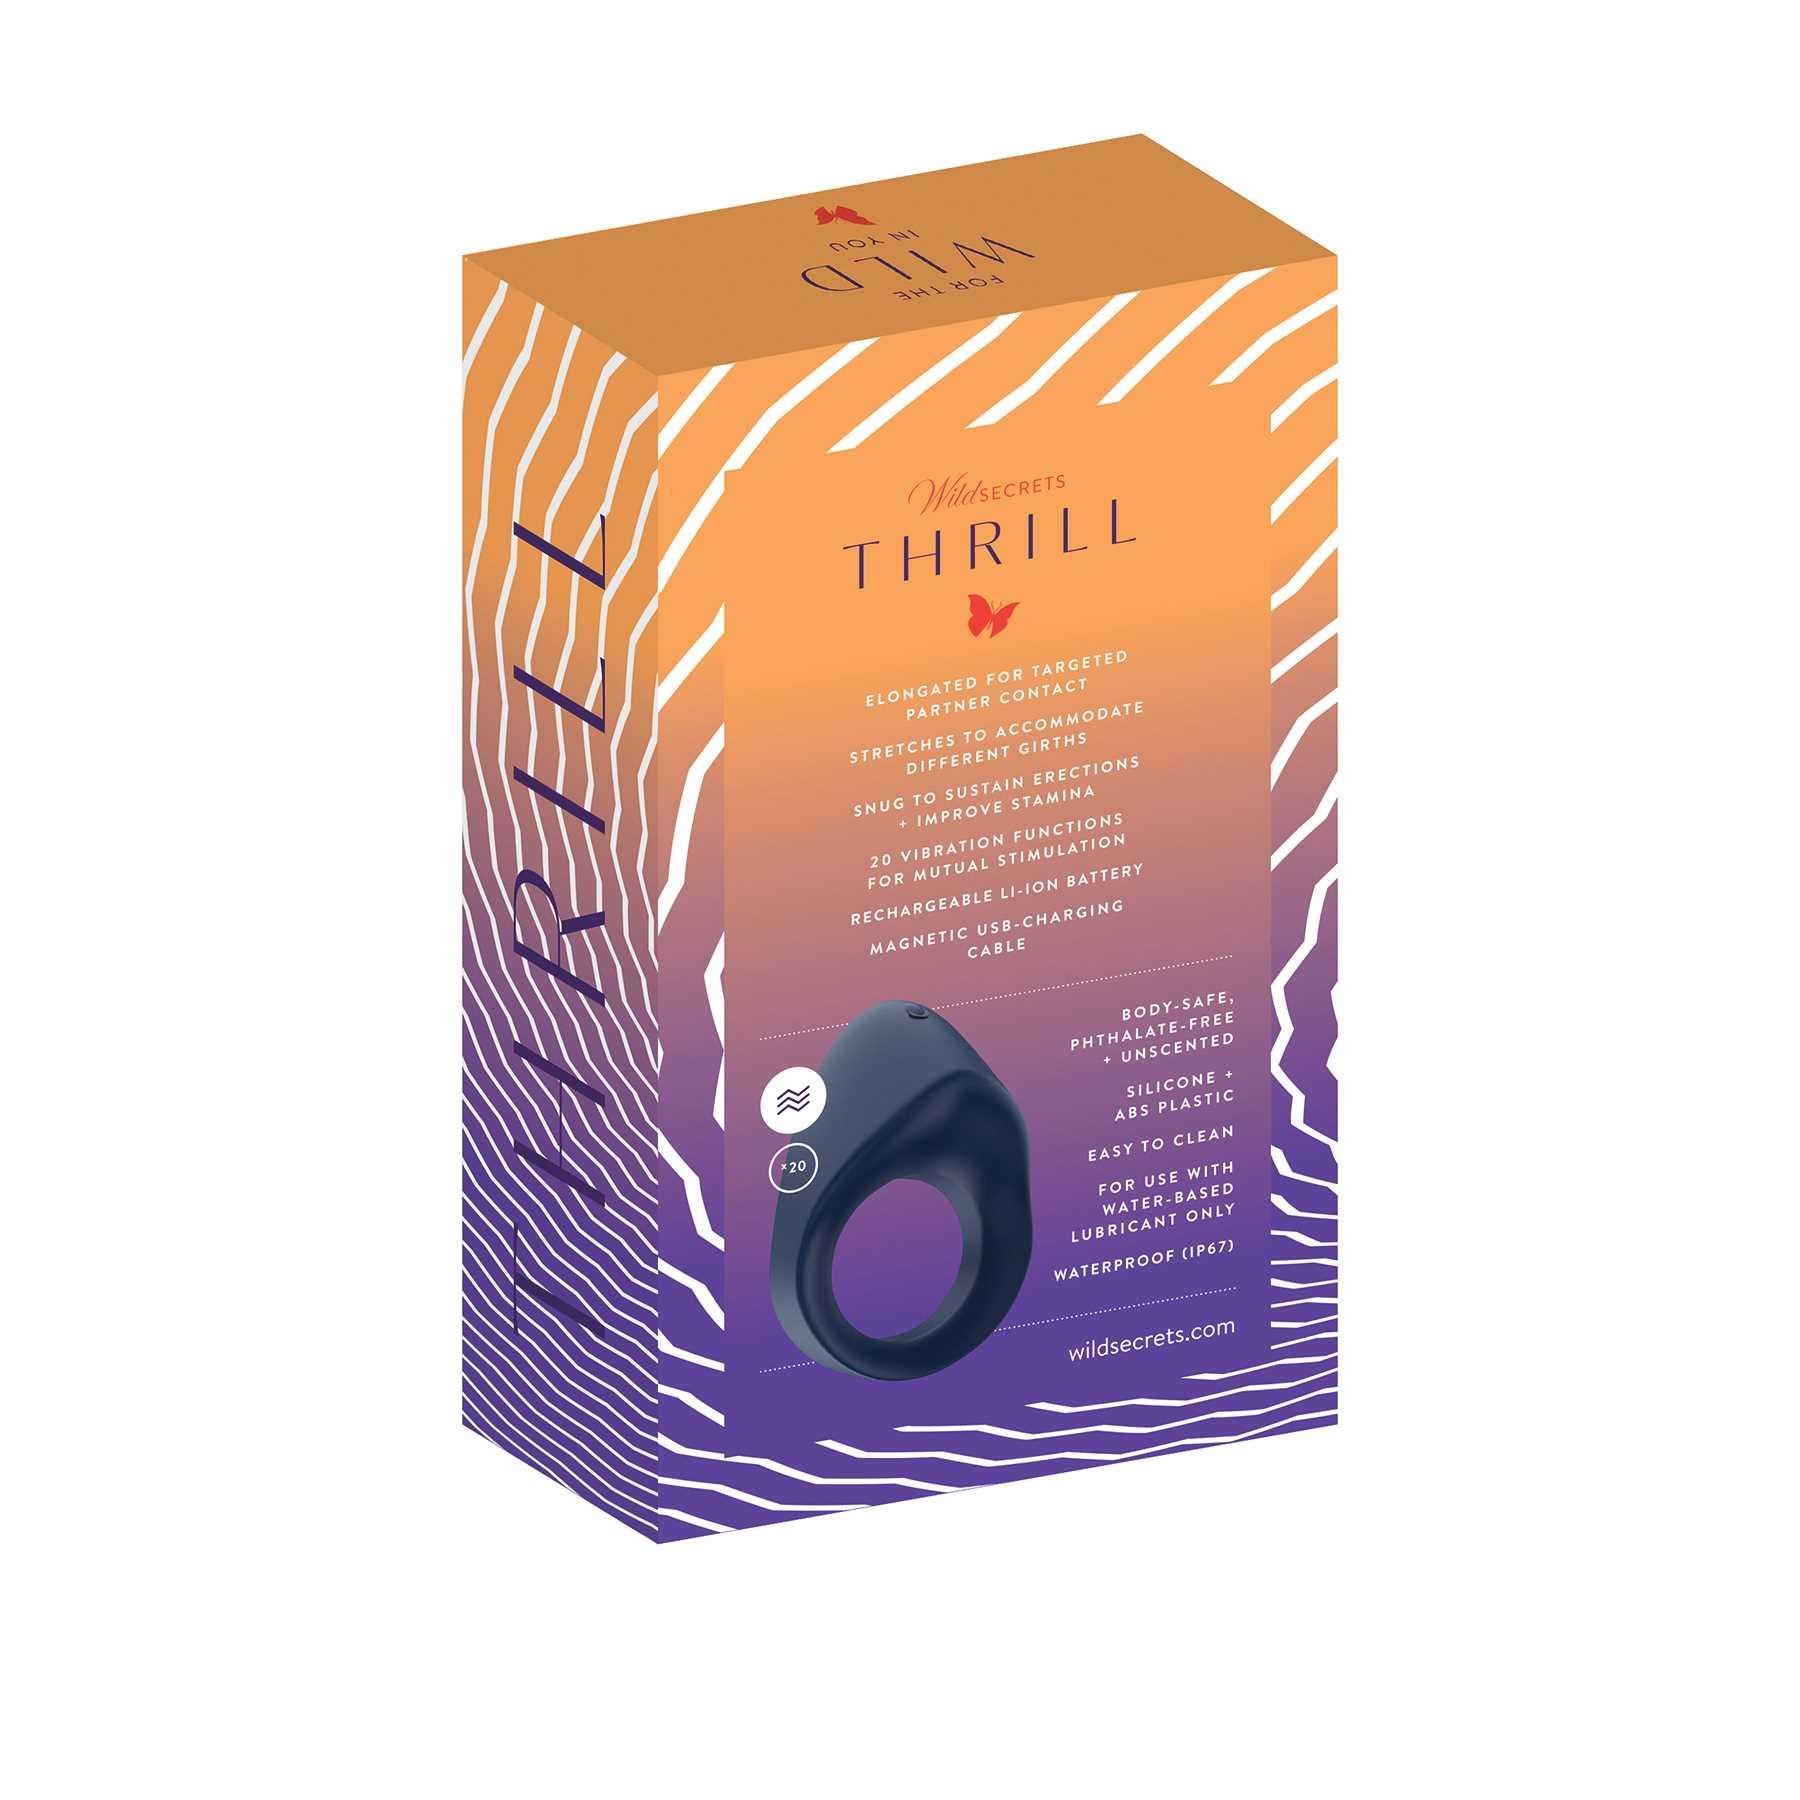 Wild Secrets Thrill Vibrating Couples Ring back box packaging